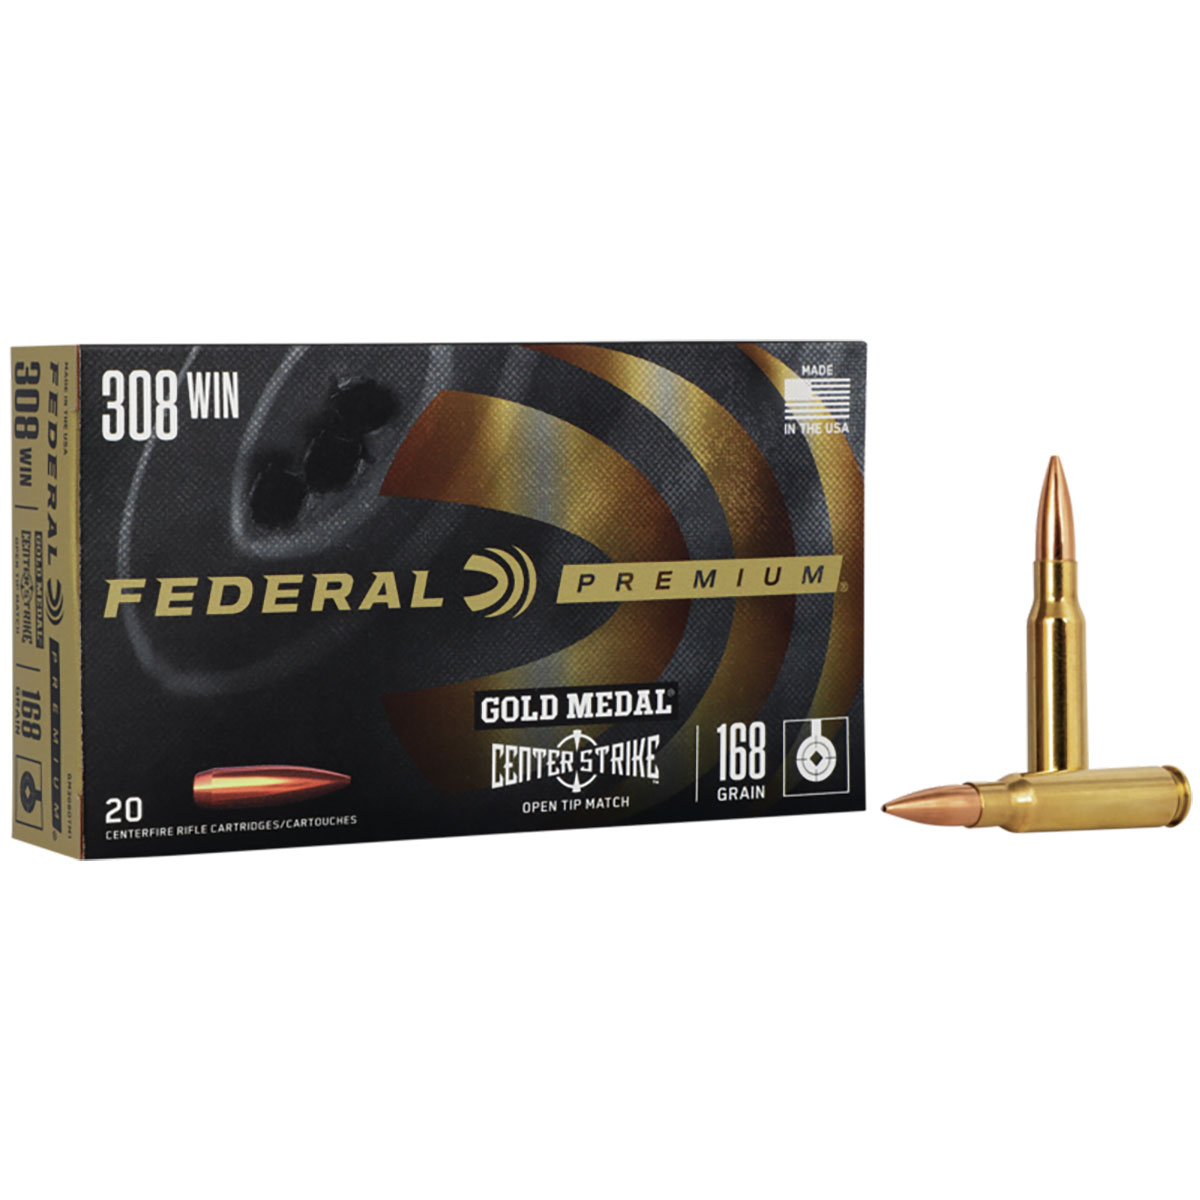 FEDERAL - GOLD MEDAL PREMIUM CENTERSTRIKE 308 WINCHESTER RIFLE AMMO